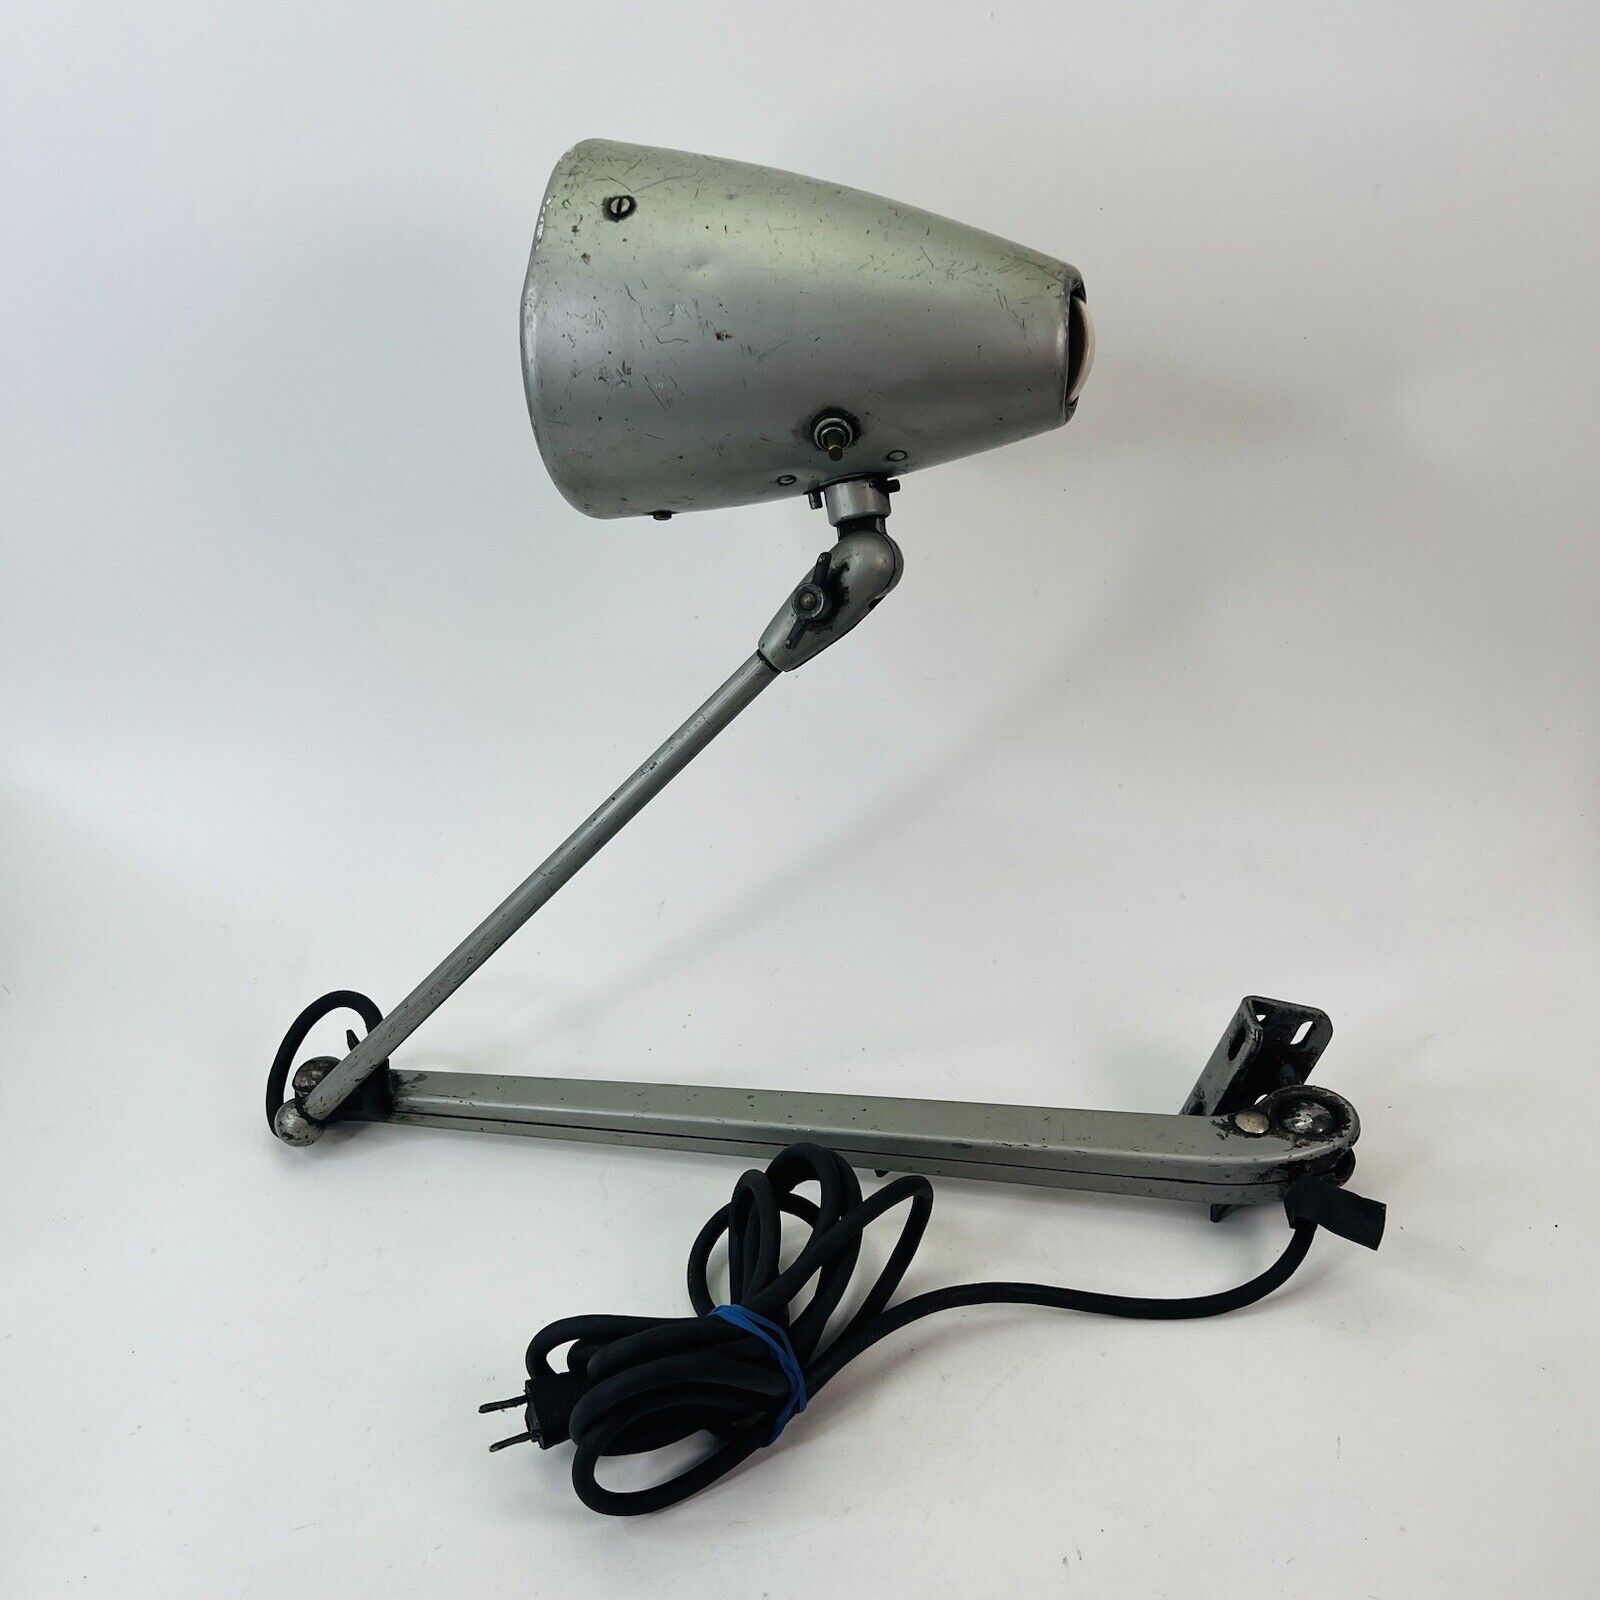 Dazor 1104 Industrial Articulating Machine Shop Light Work Lamp For PARTS